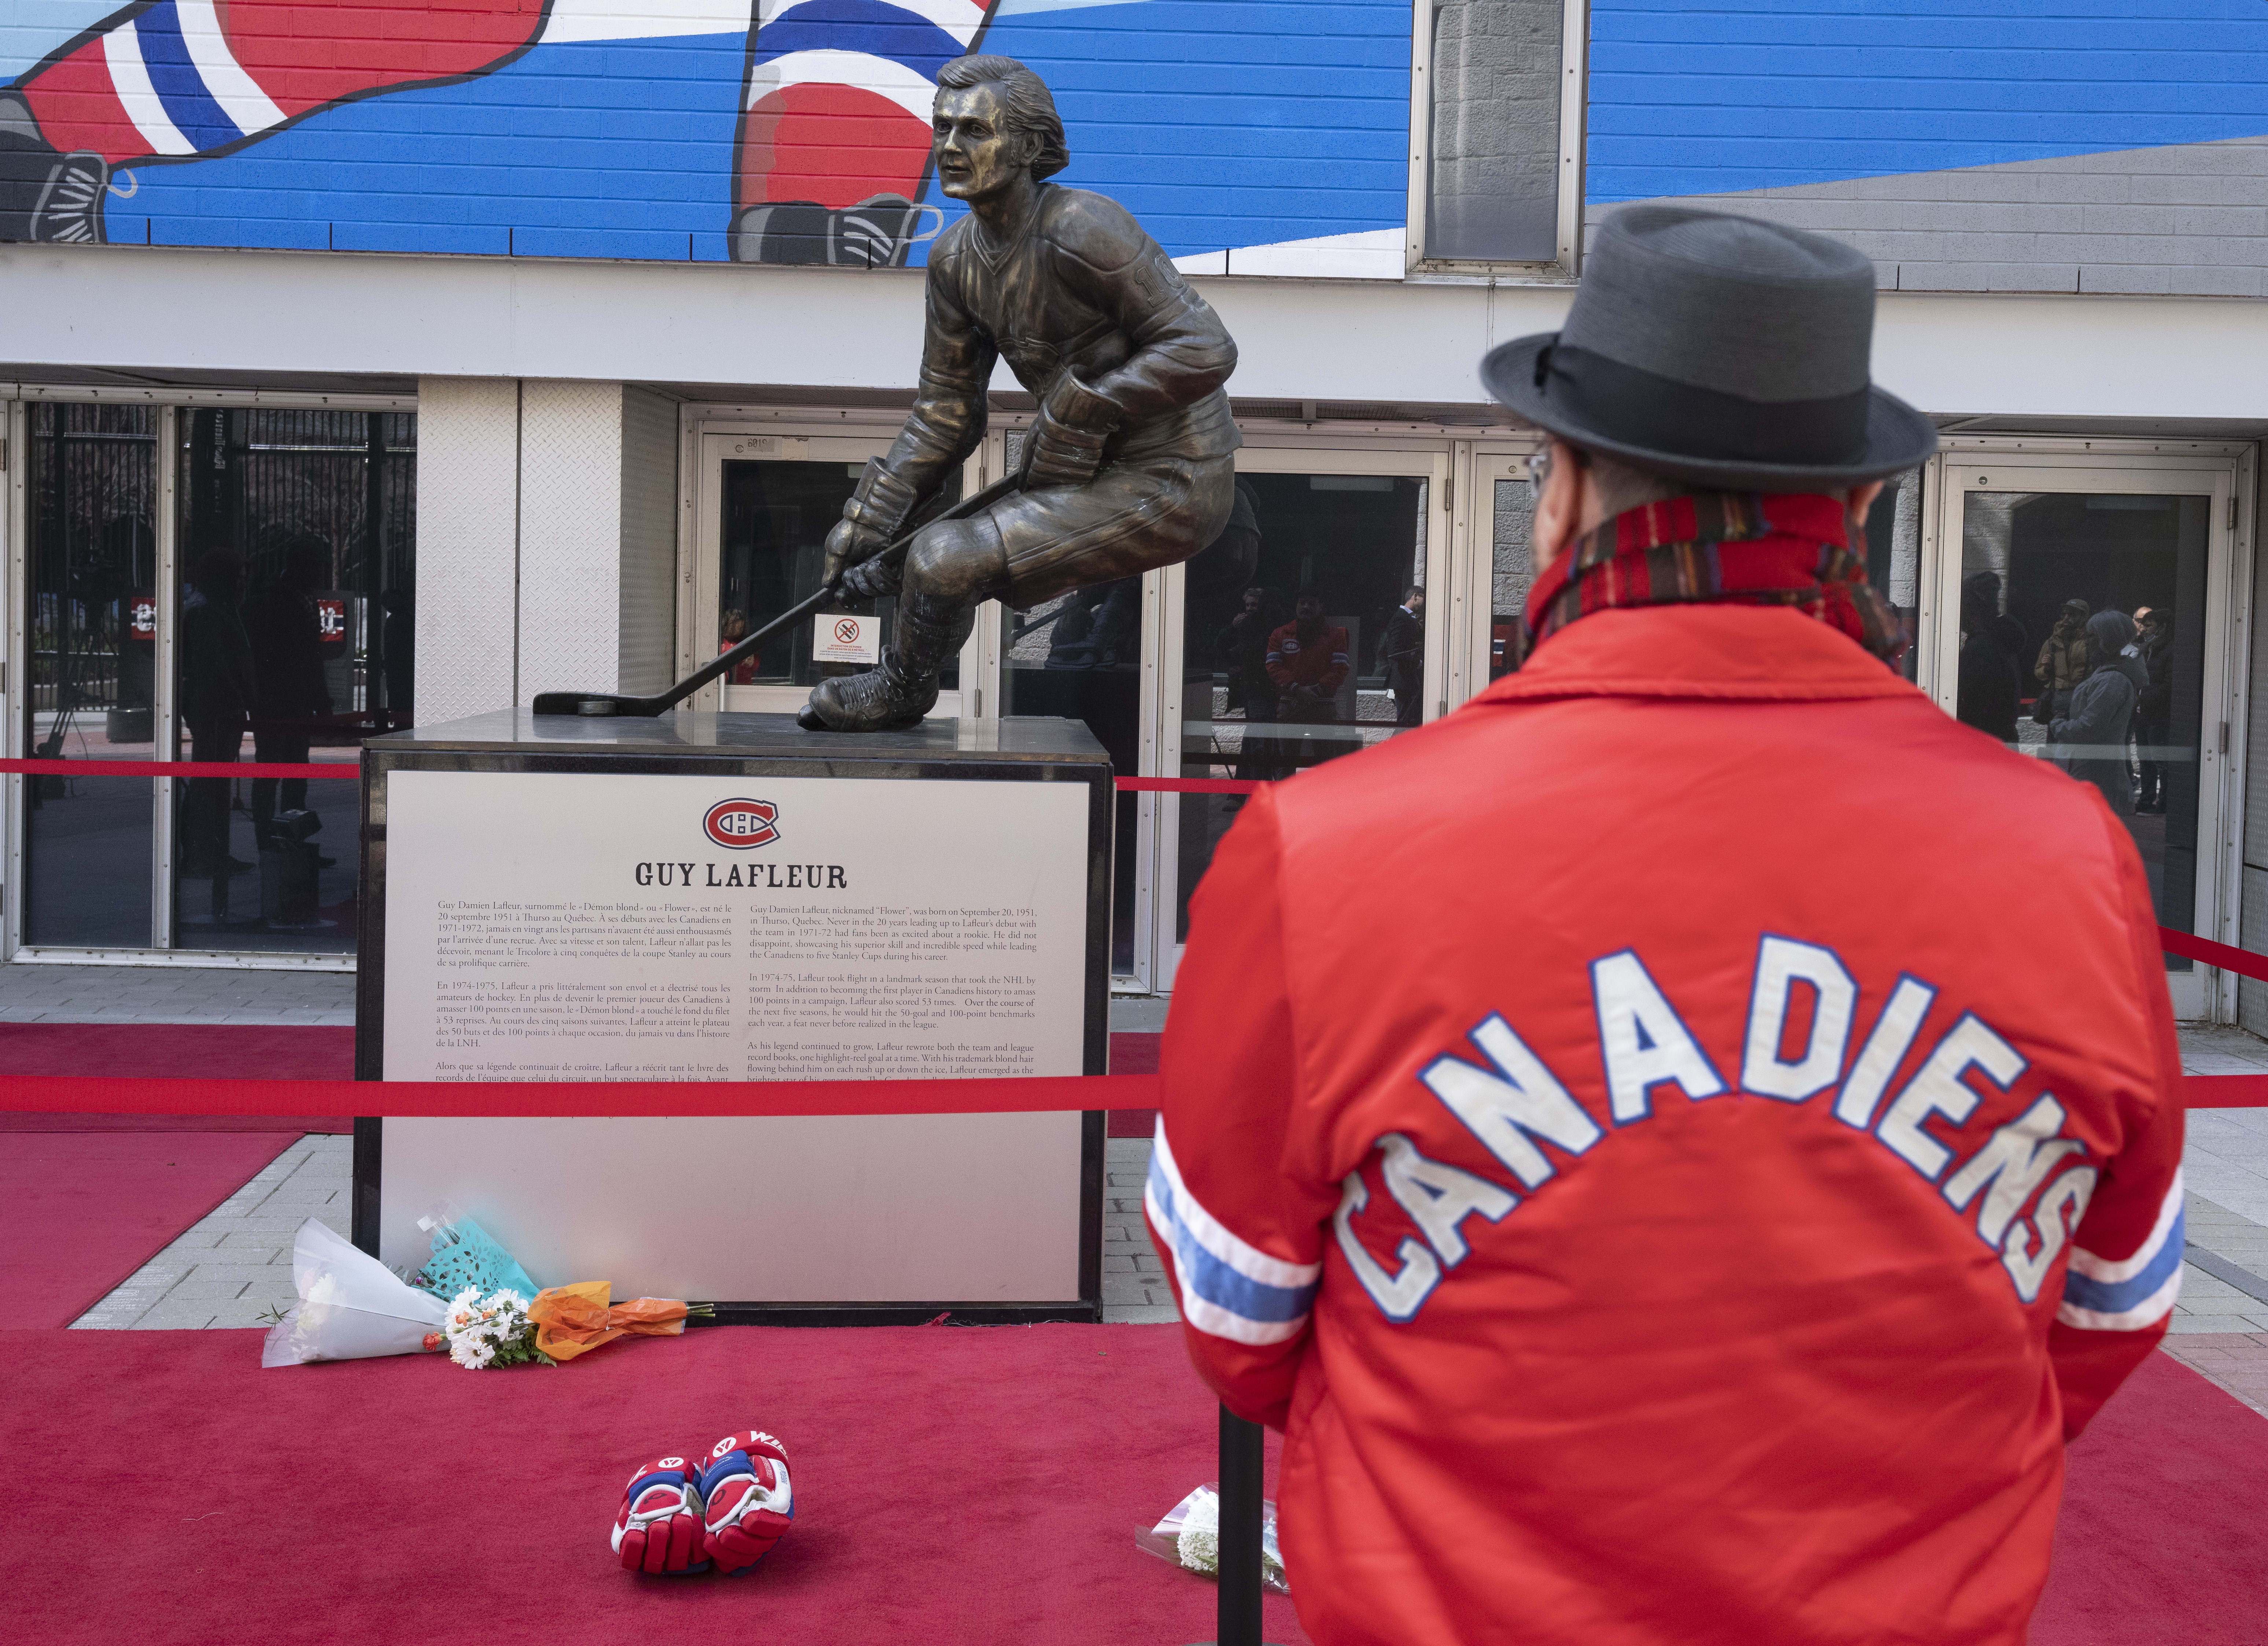 Larger than life': Hockey world reacts to death of Guy Lafleur